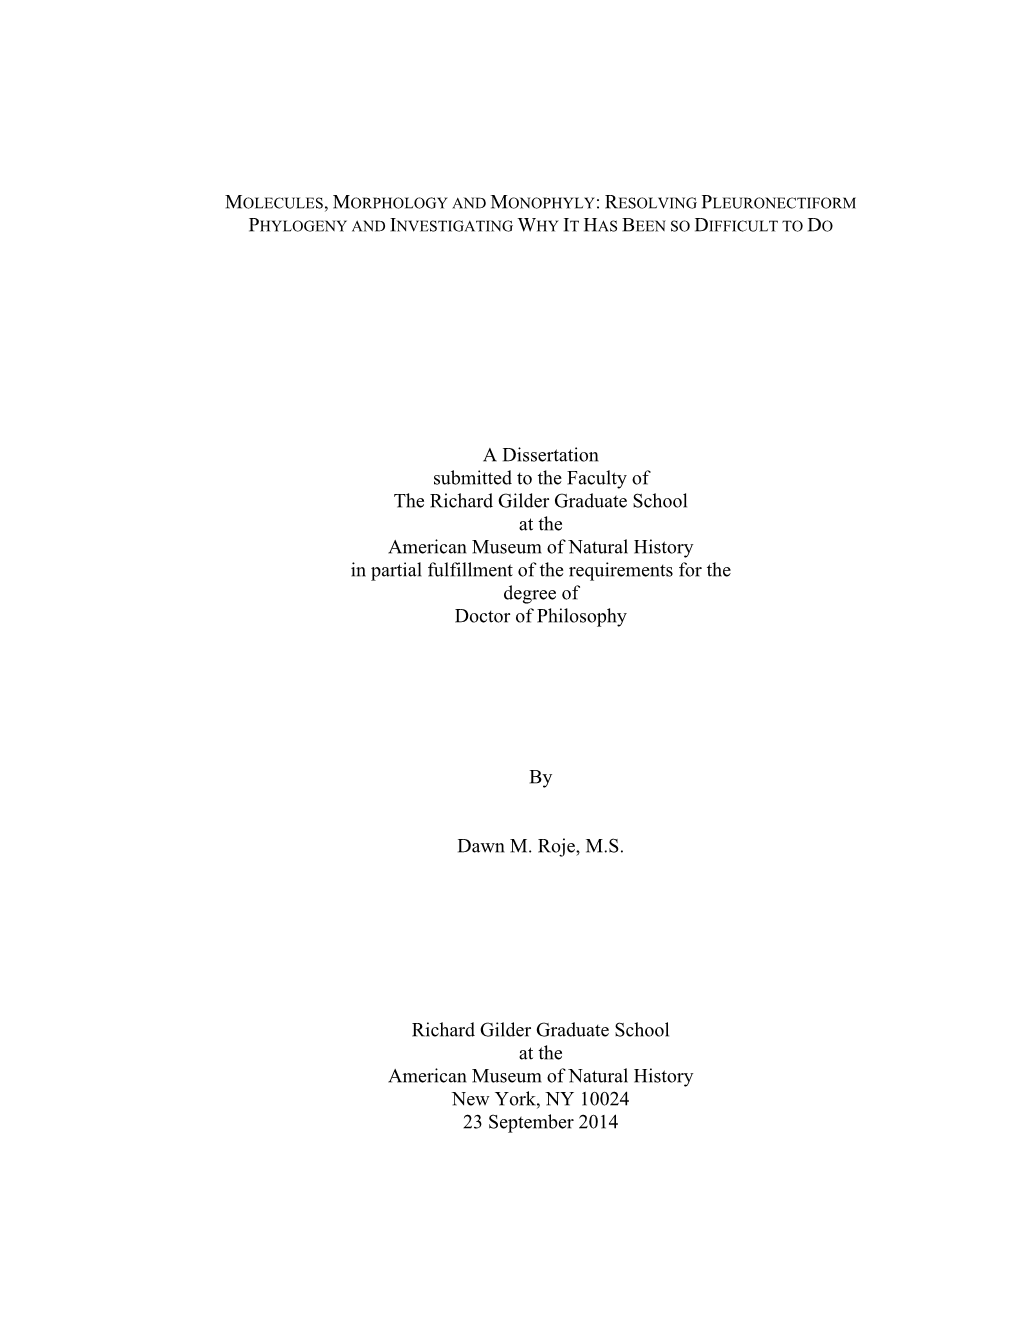 A Dissertation Submitted to the Faculty of the Richard Gilder Graduate